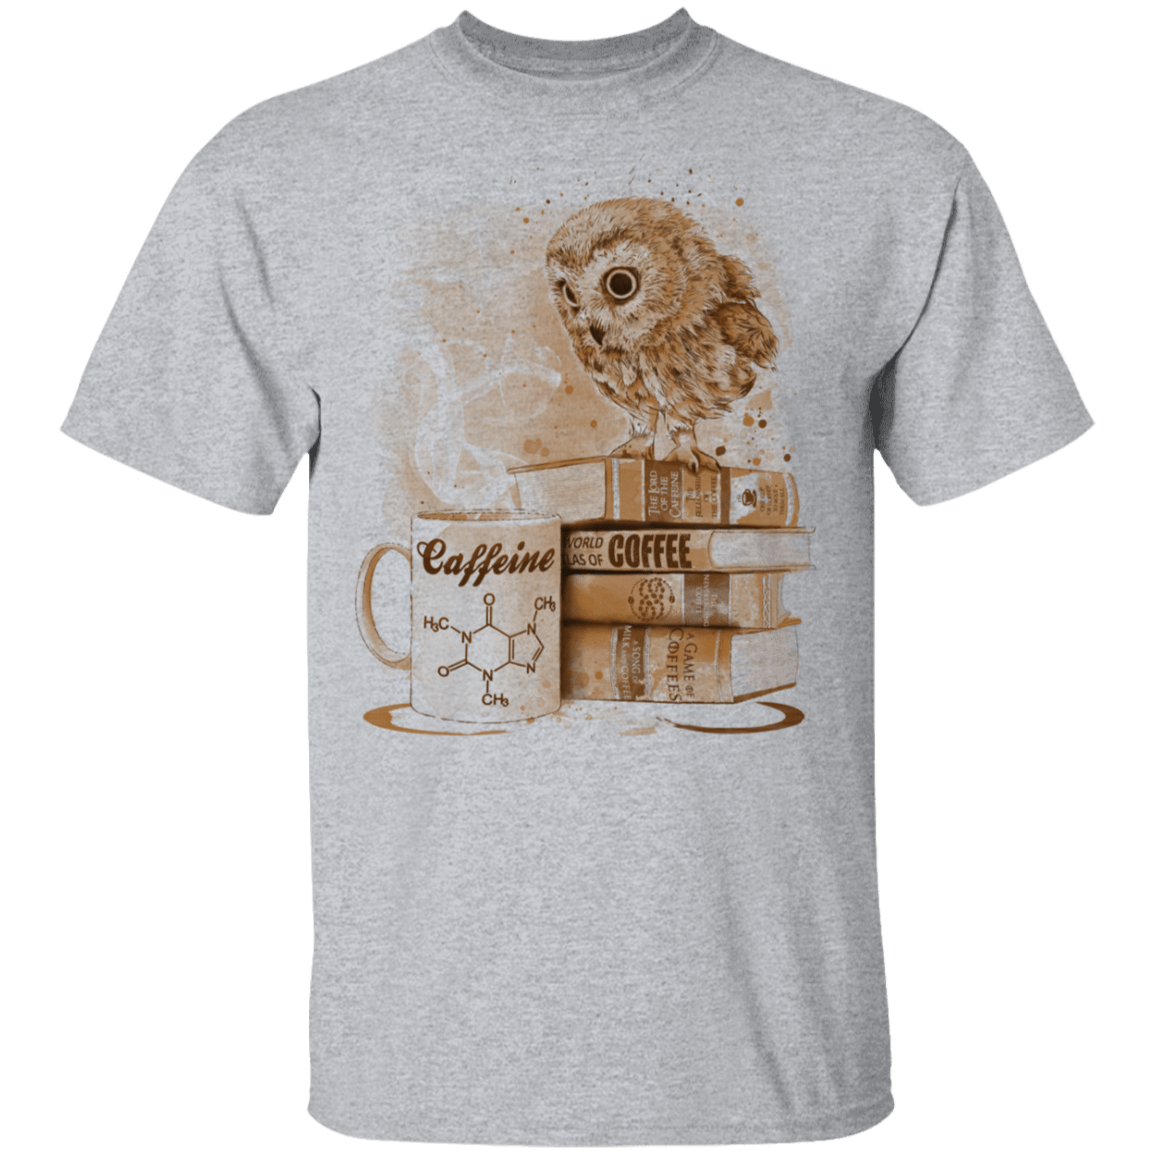 T-Shirts Sport Grey / S Coffee Obsessed T-Shirt